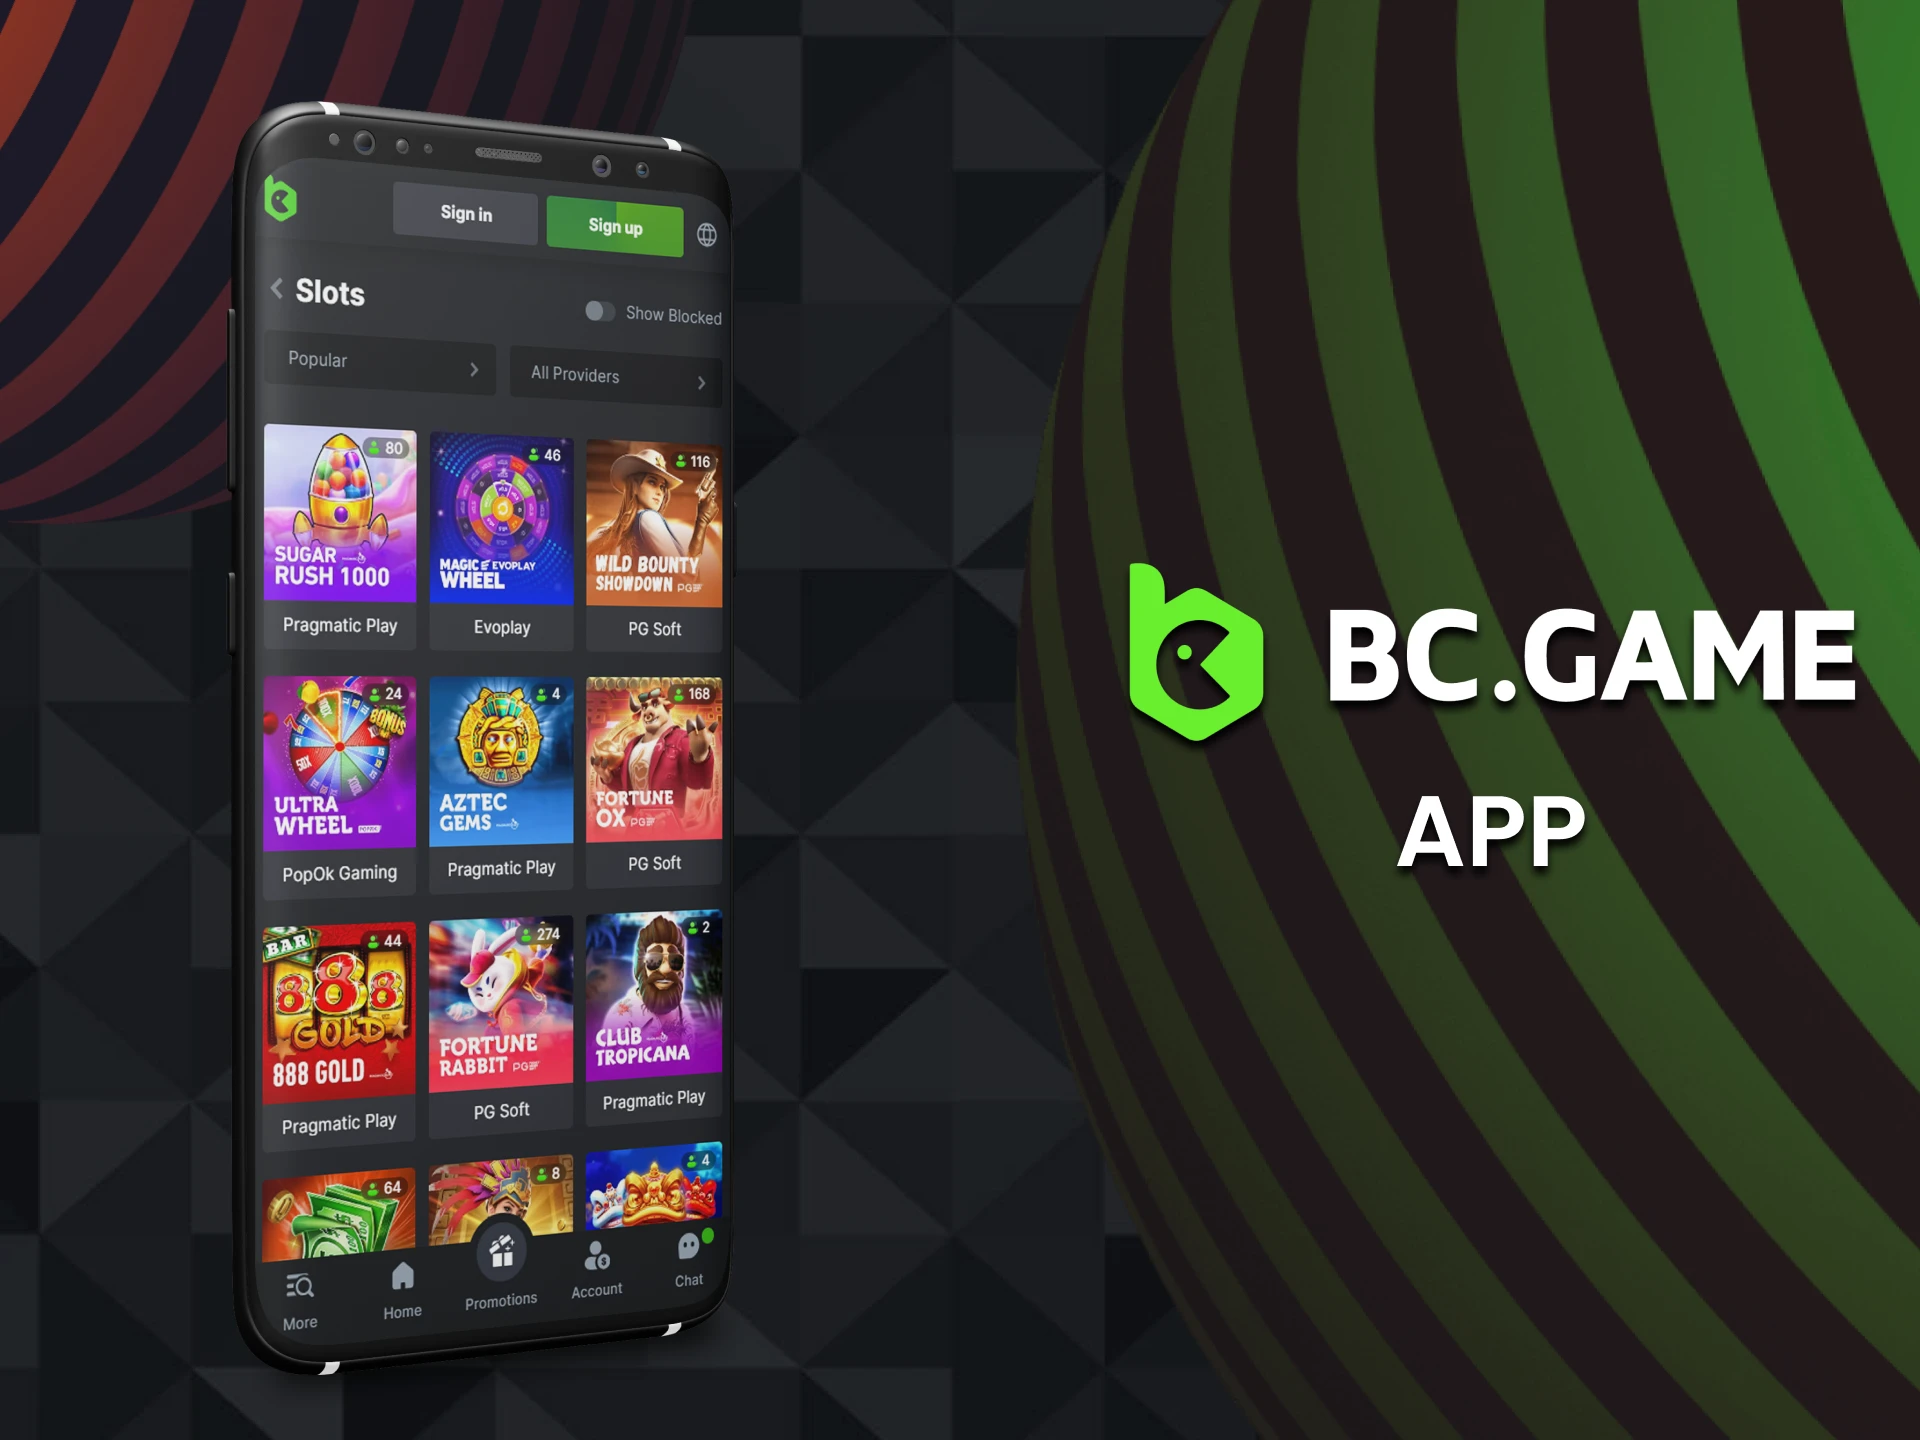 Download and install app to play BC Game slots via phone.